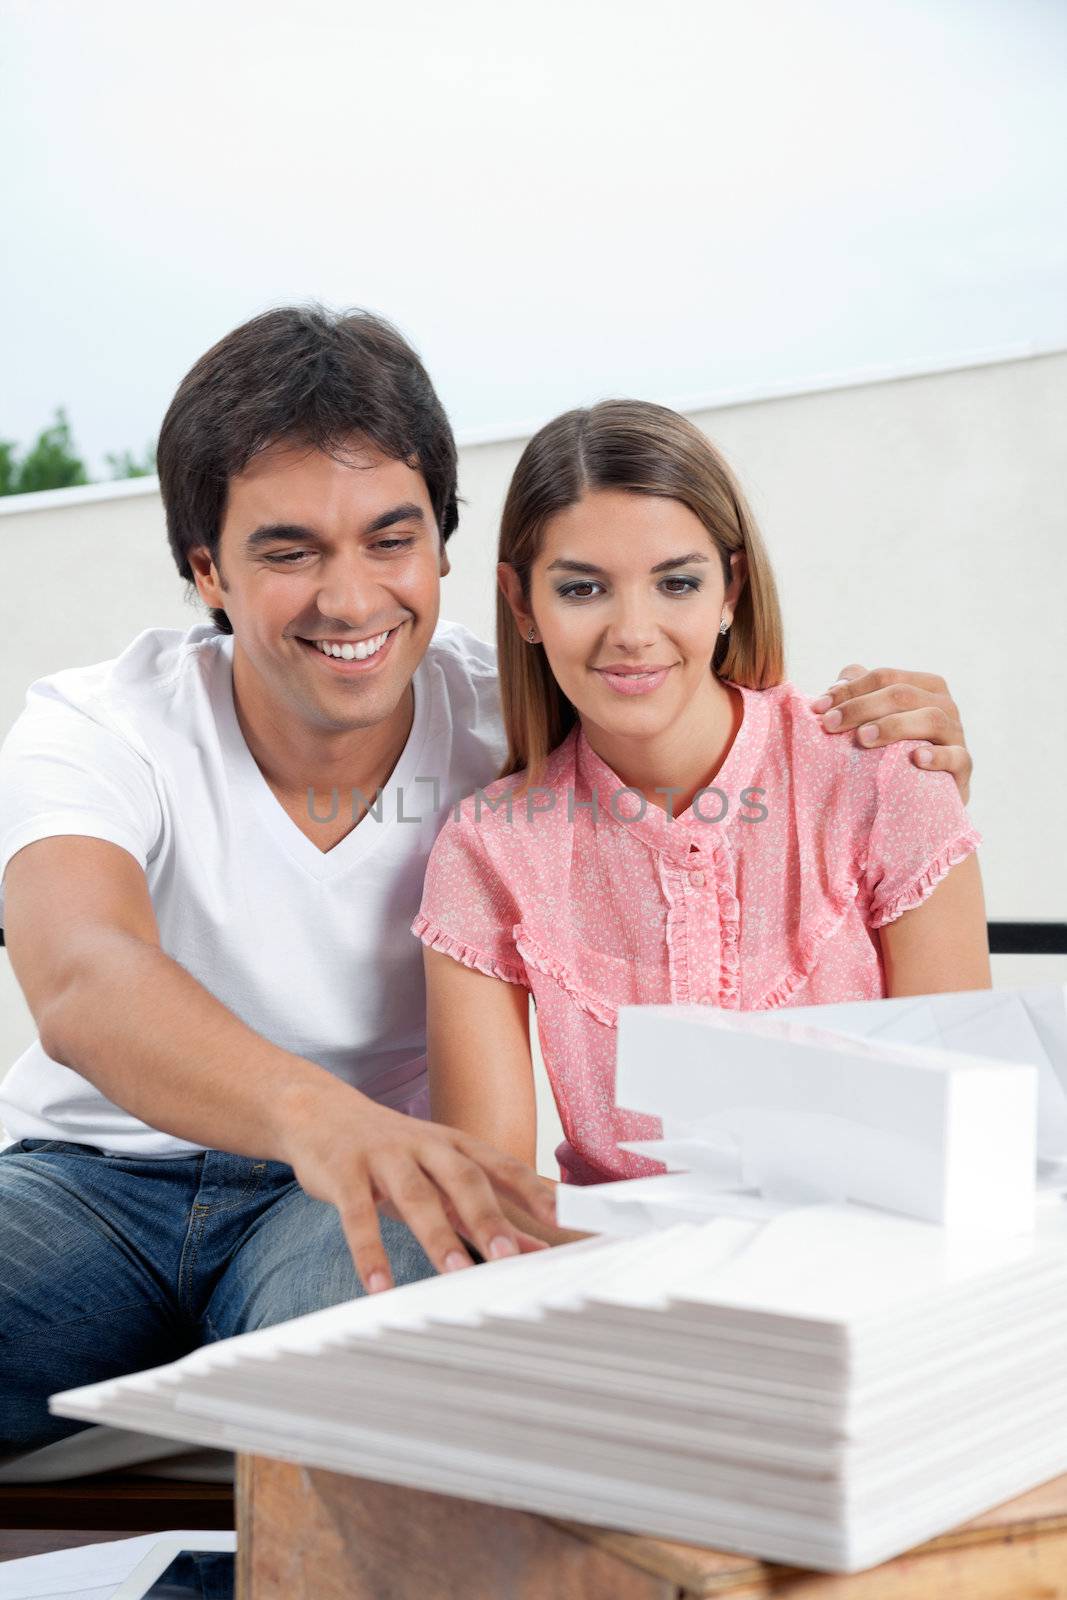 Happy young couple in casuals looking at an architectural model structure